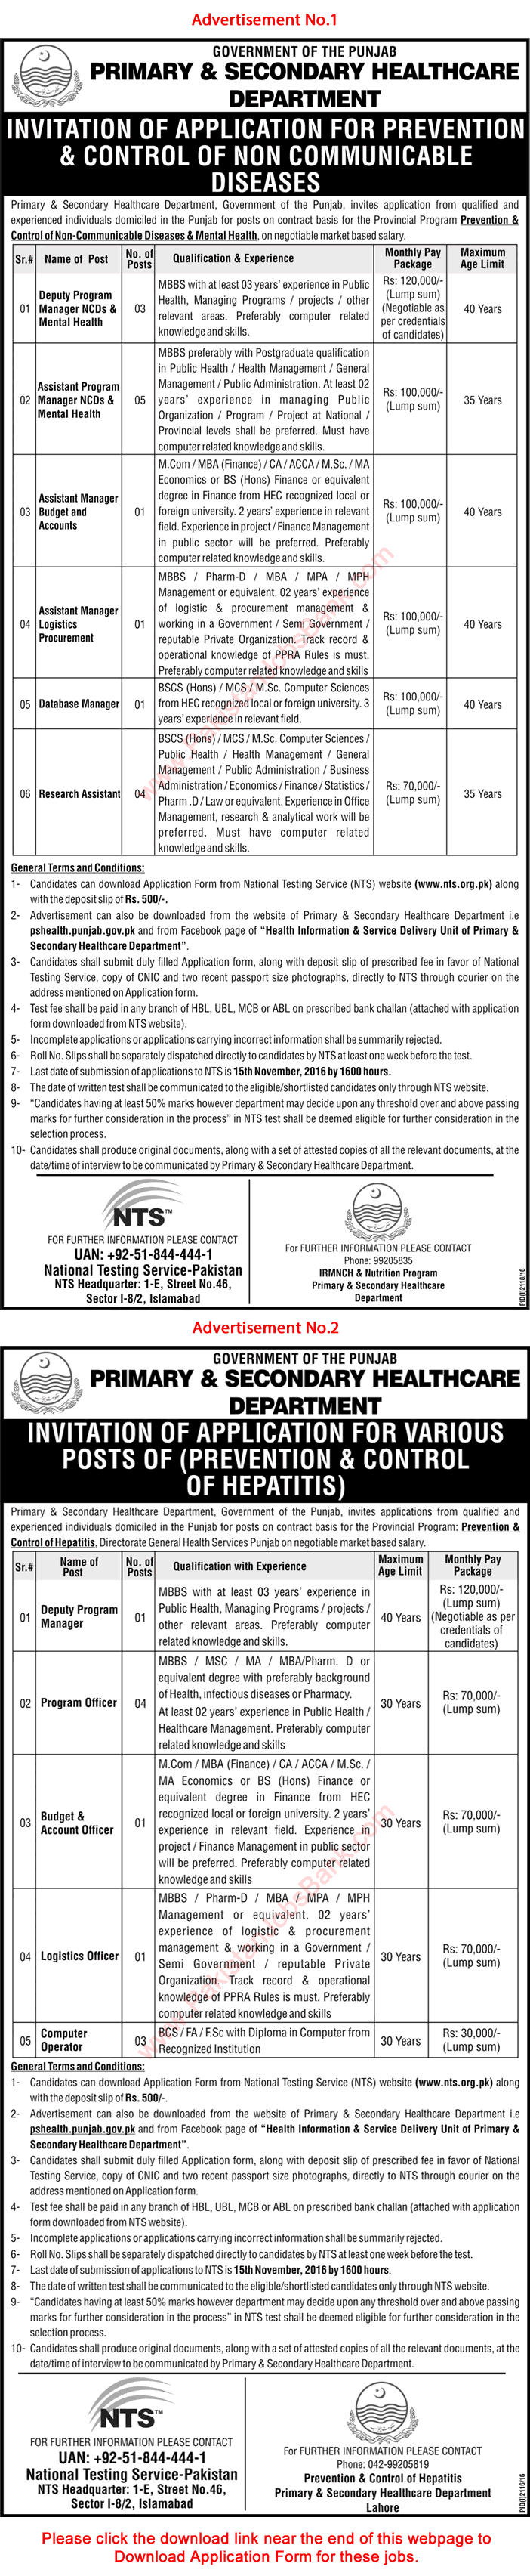 Primary and Secondary Healthcare Department Punjab Jobs October 2016 November NTS Application Form Latest